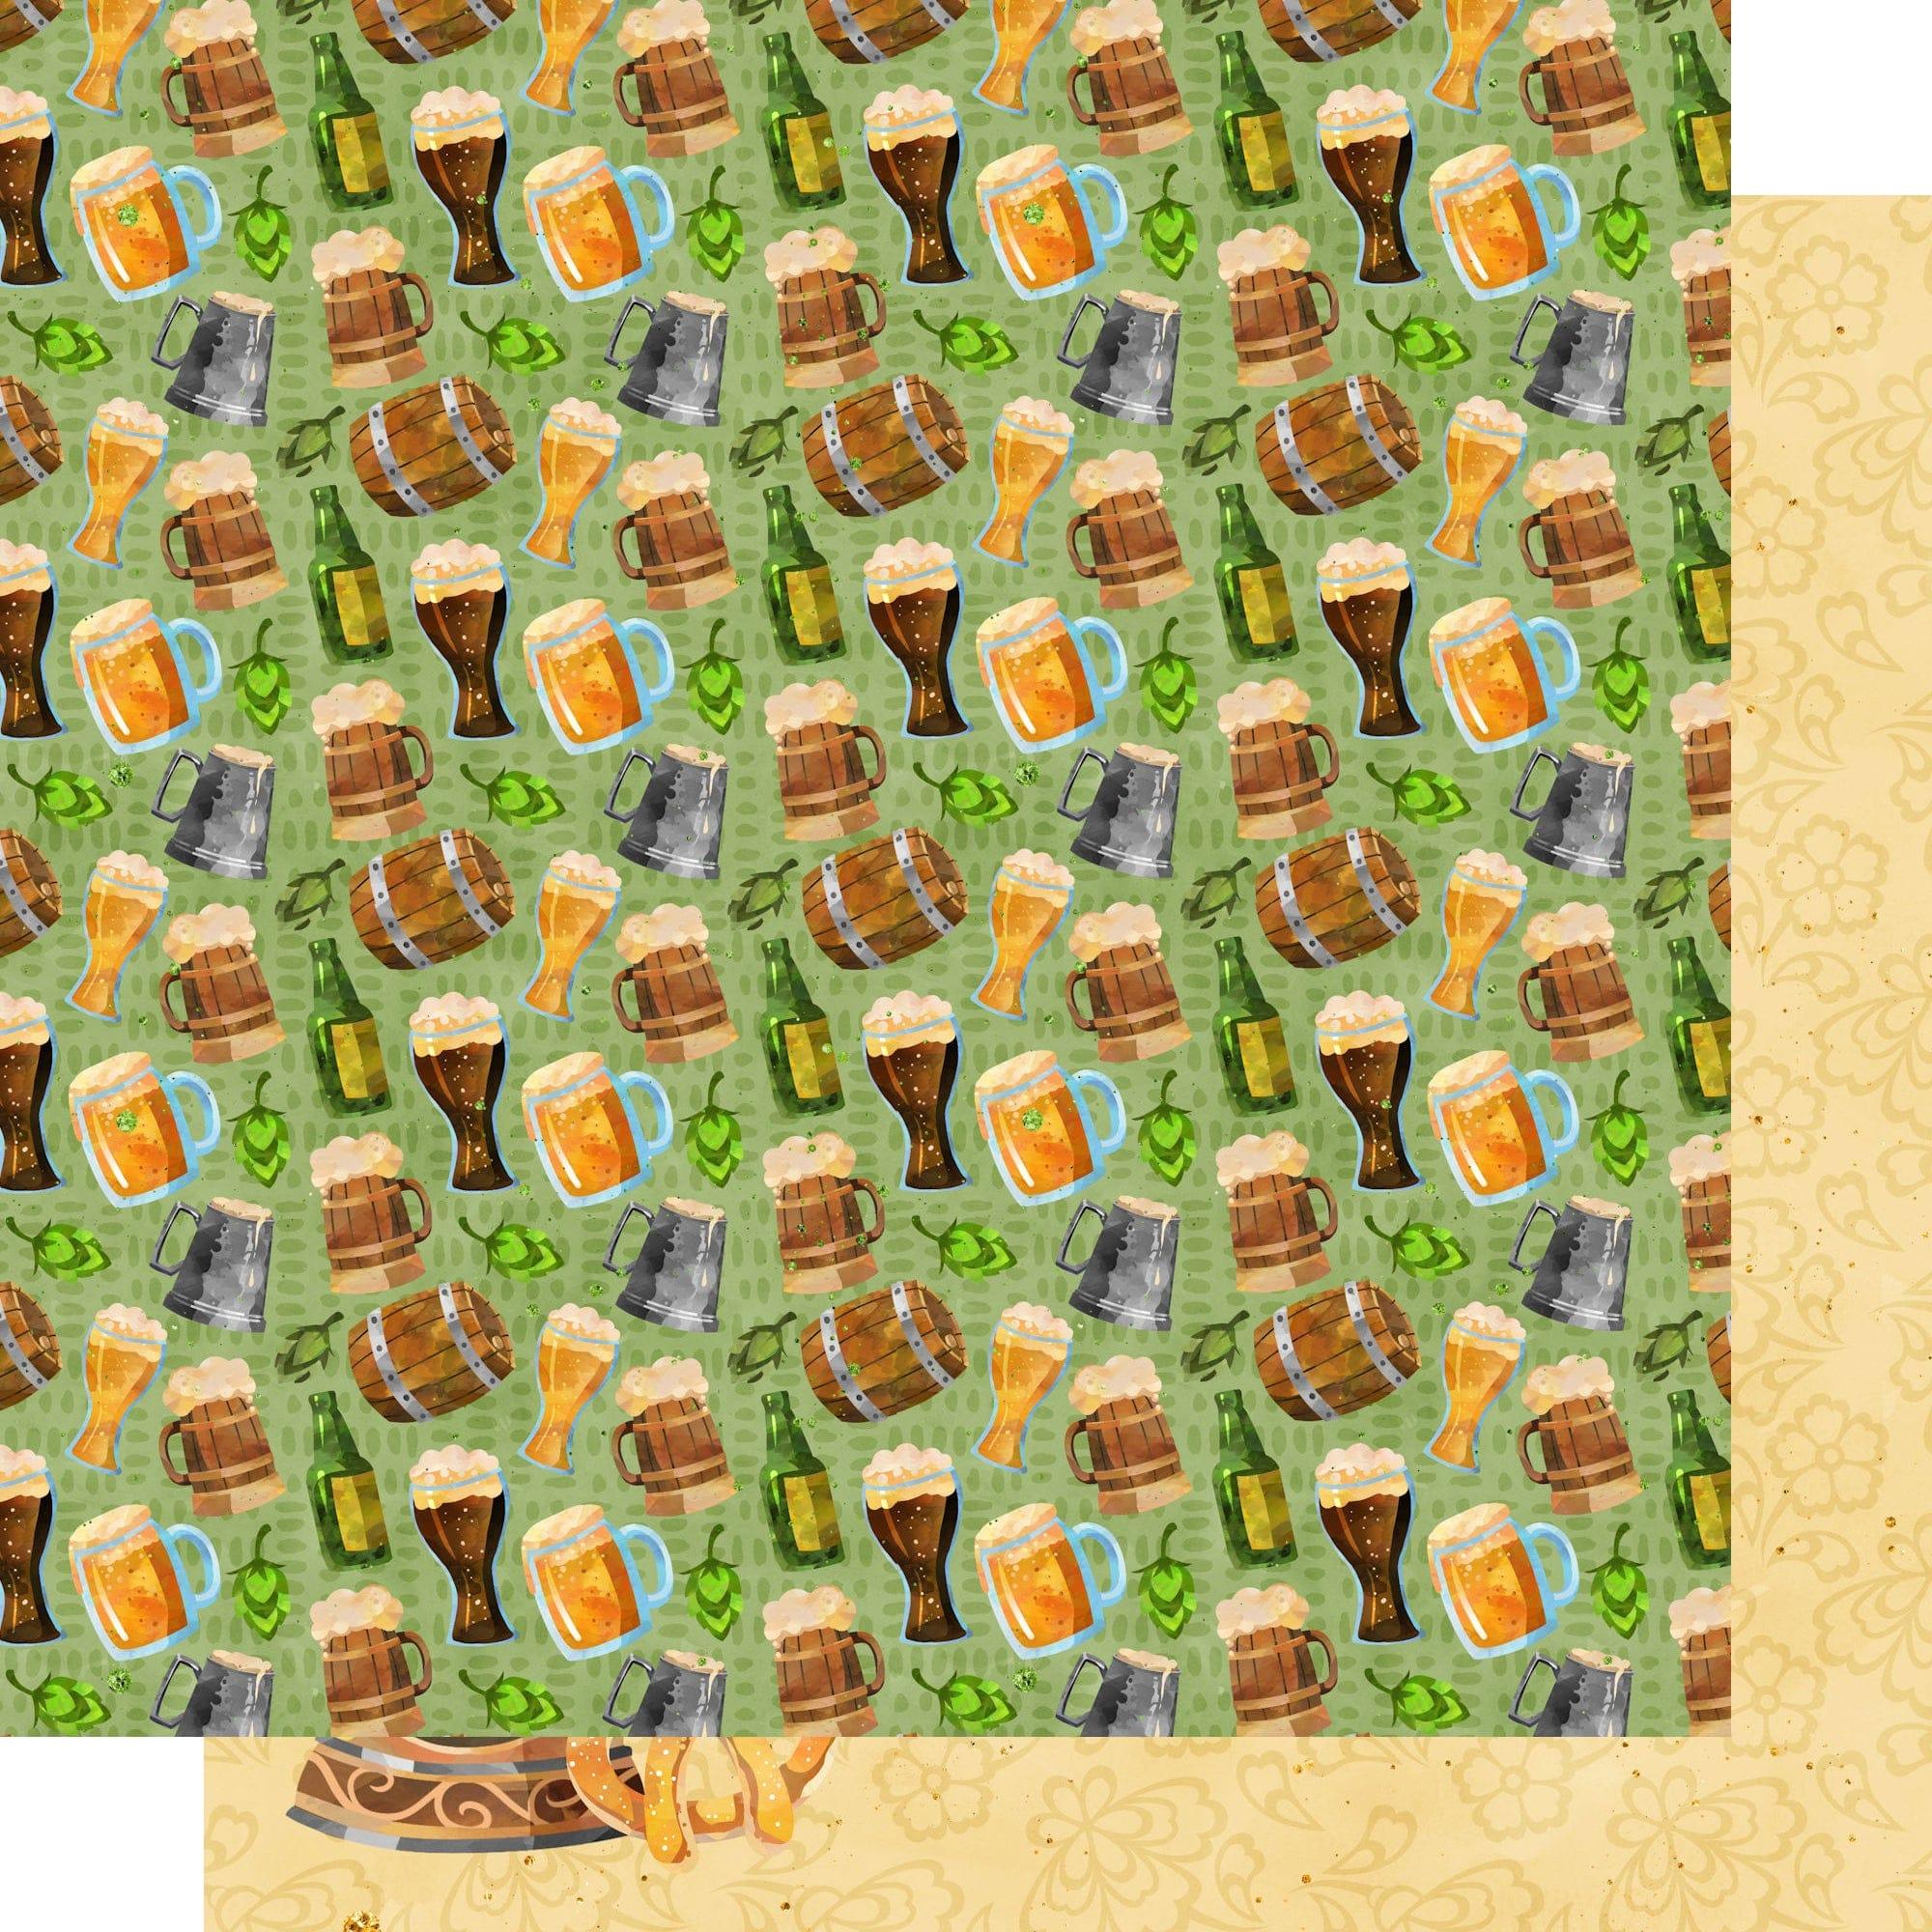  Oktoberfest Collection Beer Me 12 x 12 Double-Sided Scrapbook Paper by SSC Designs - Scrapbook Supply Companies